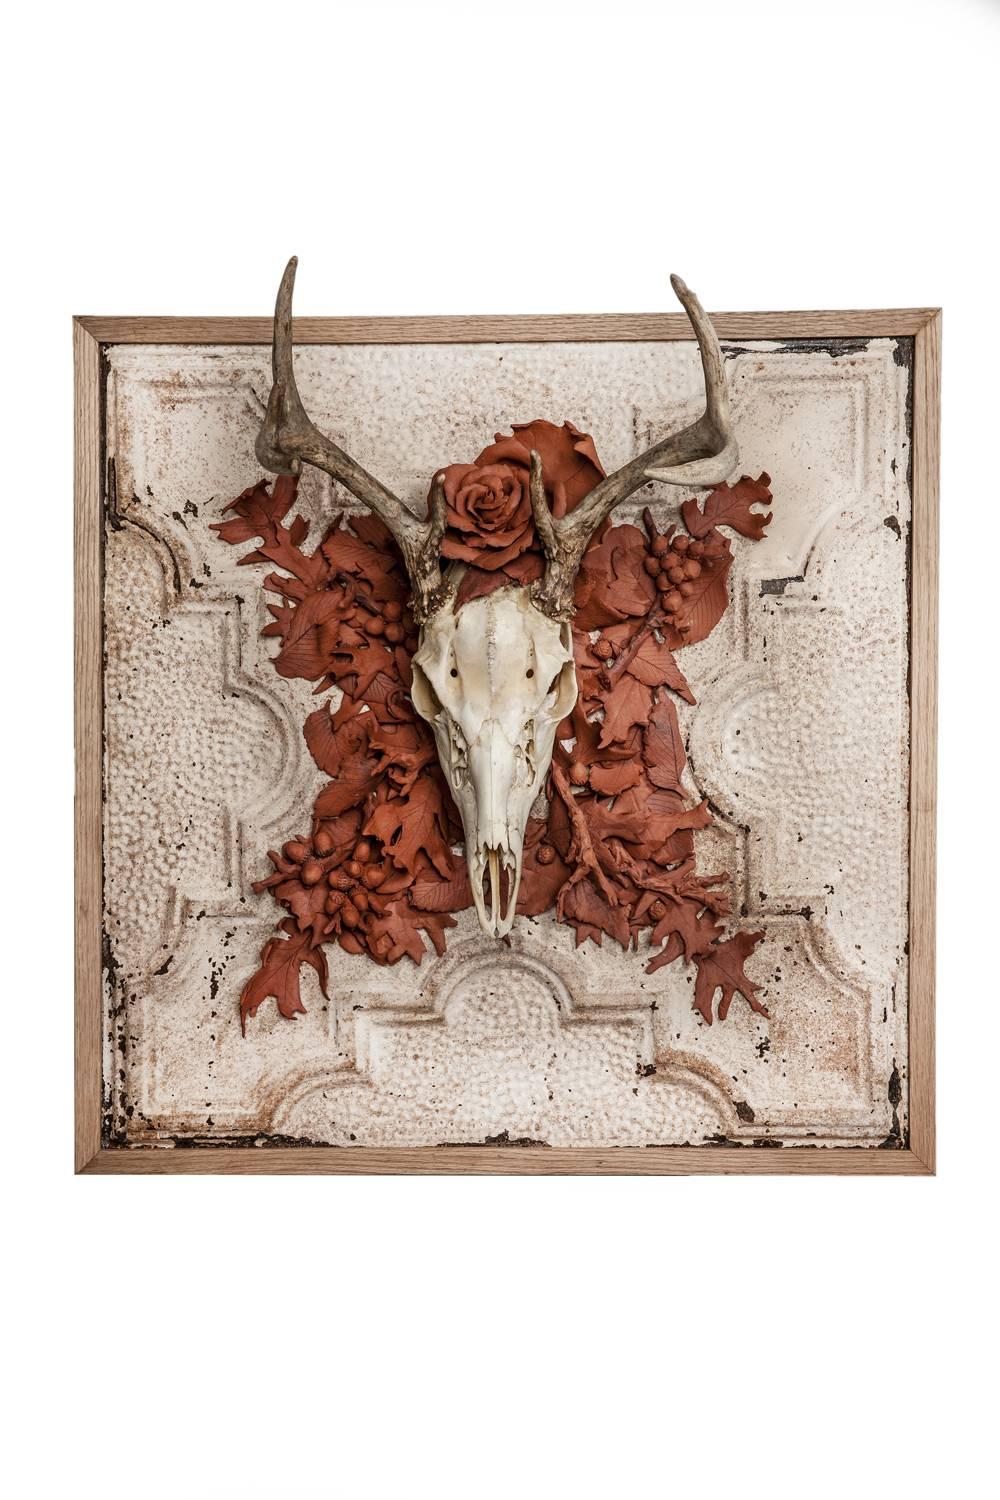 Fall is a sculpture by artist Marcy Lally. The piece is made of a Deer skull with handmade ceramic terracotta leaves on vintage ceiling tin. 
In an expression of the autumnal season, an assemblage of varied leaf casings have been put together with